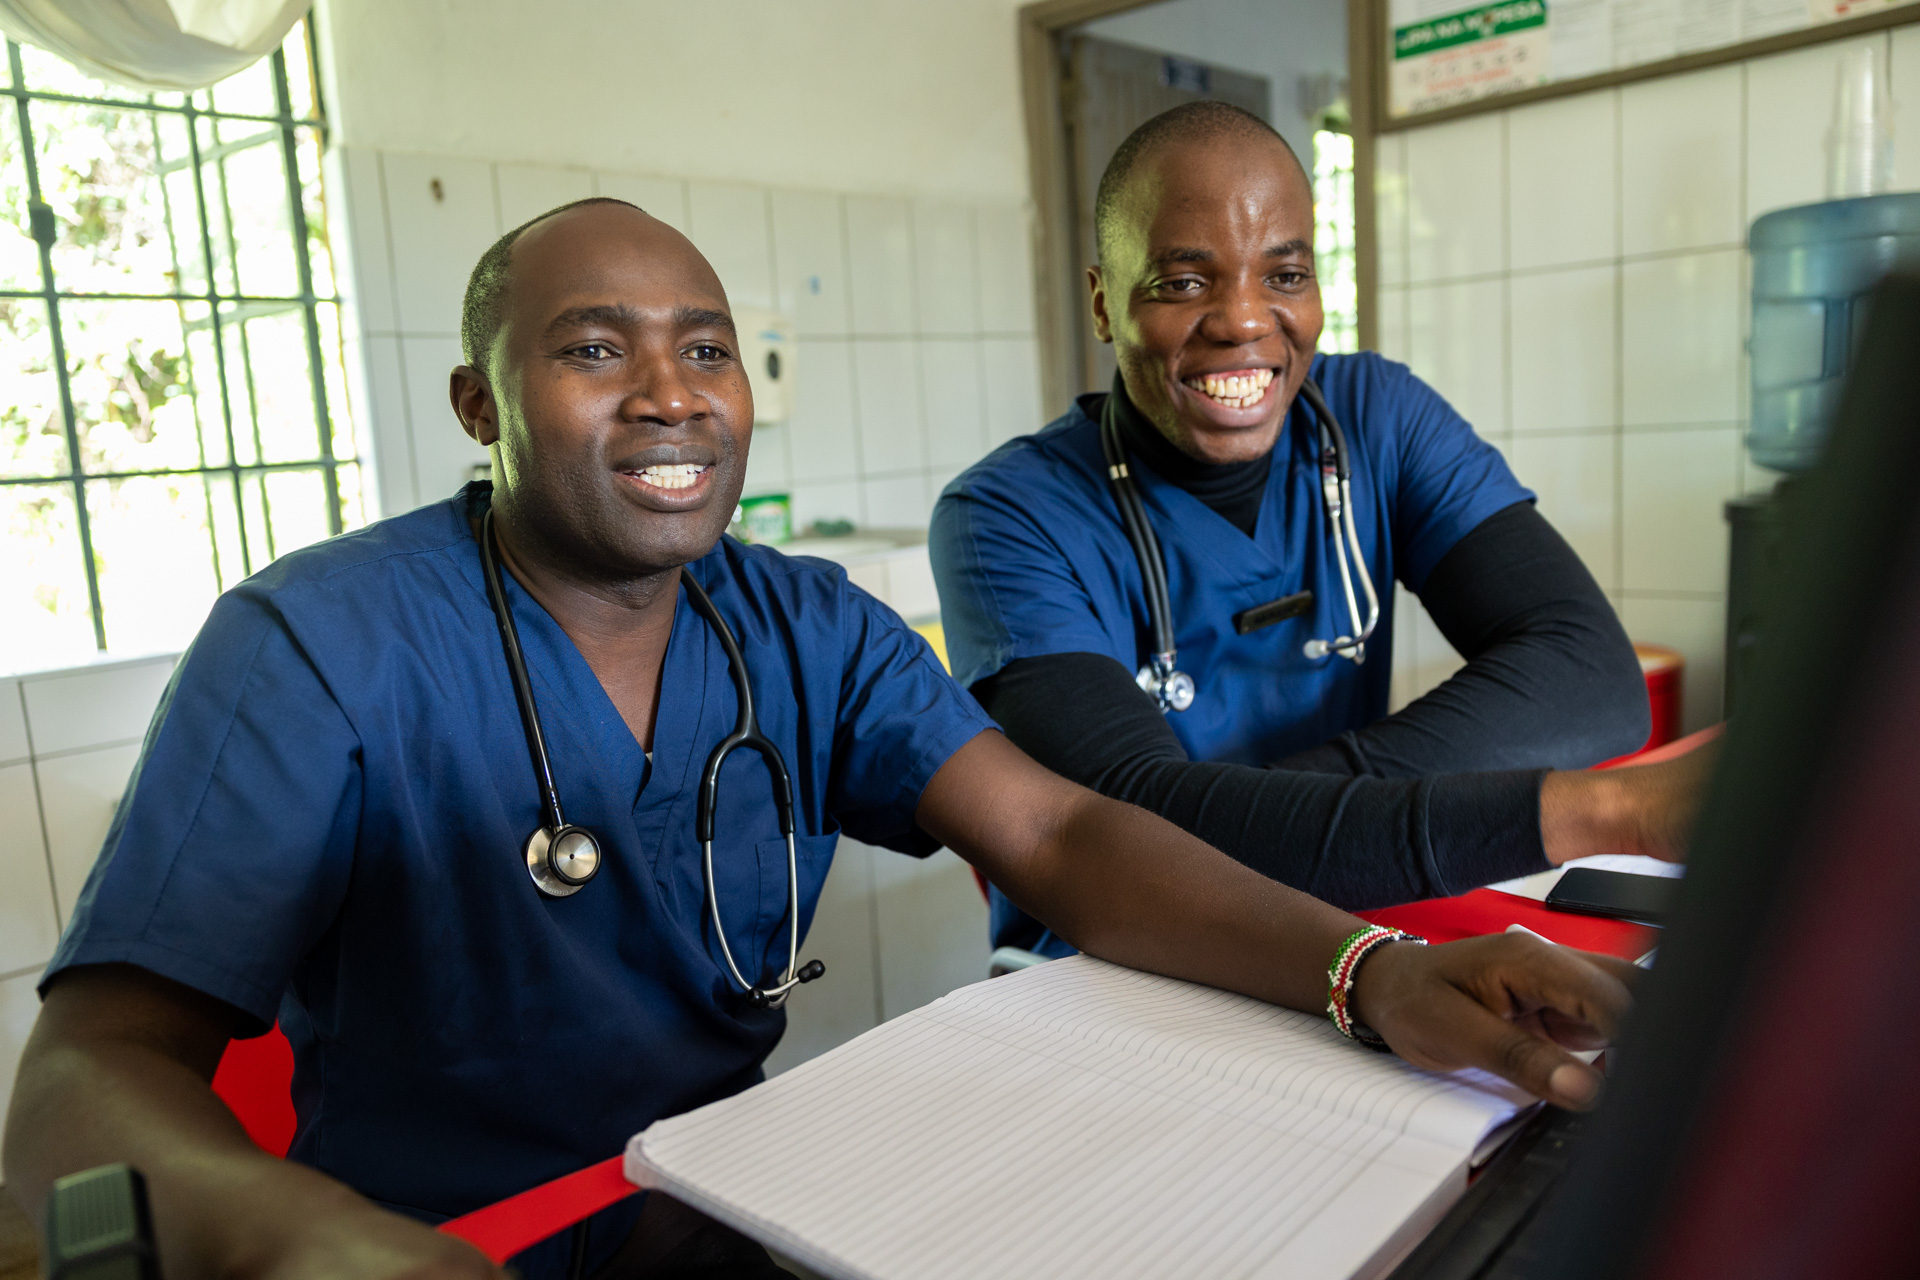 Not even the paperwork can dampen Dr Emmanuel and Dr Mark's smile  